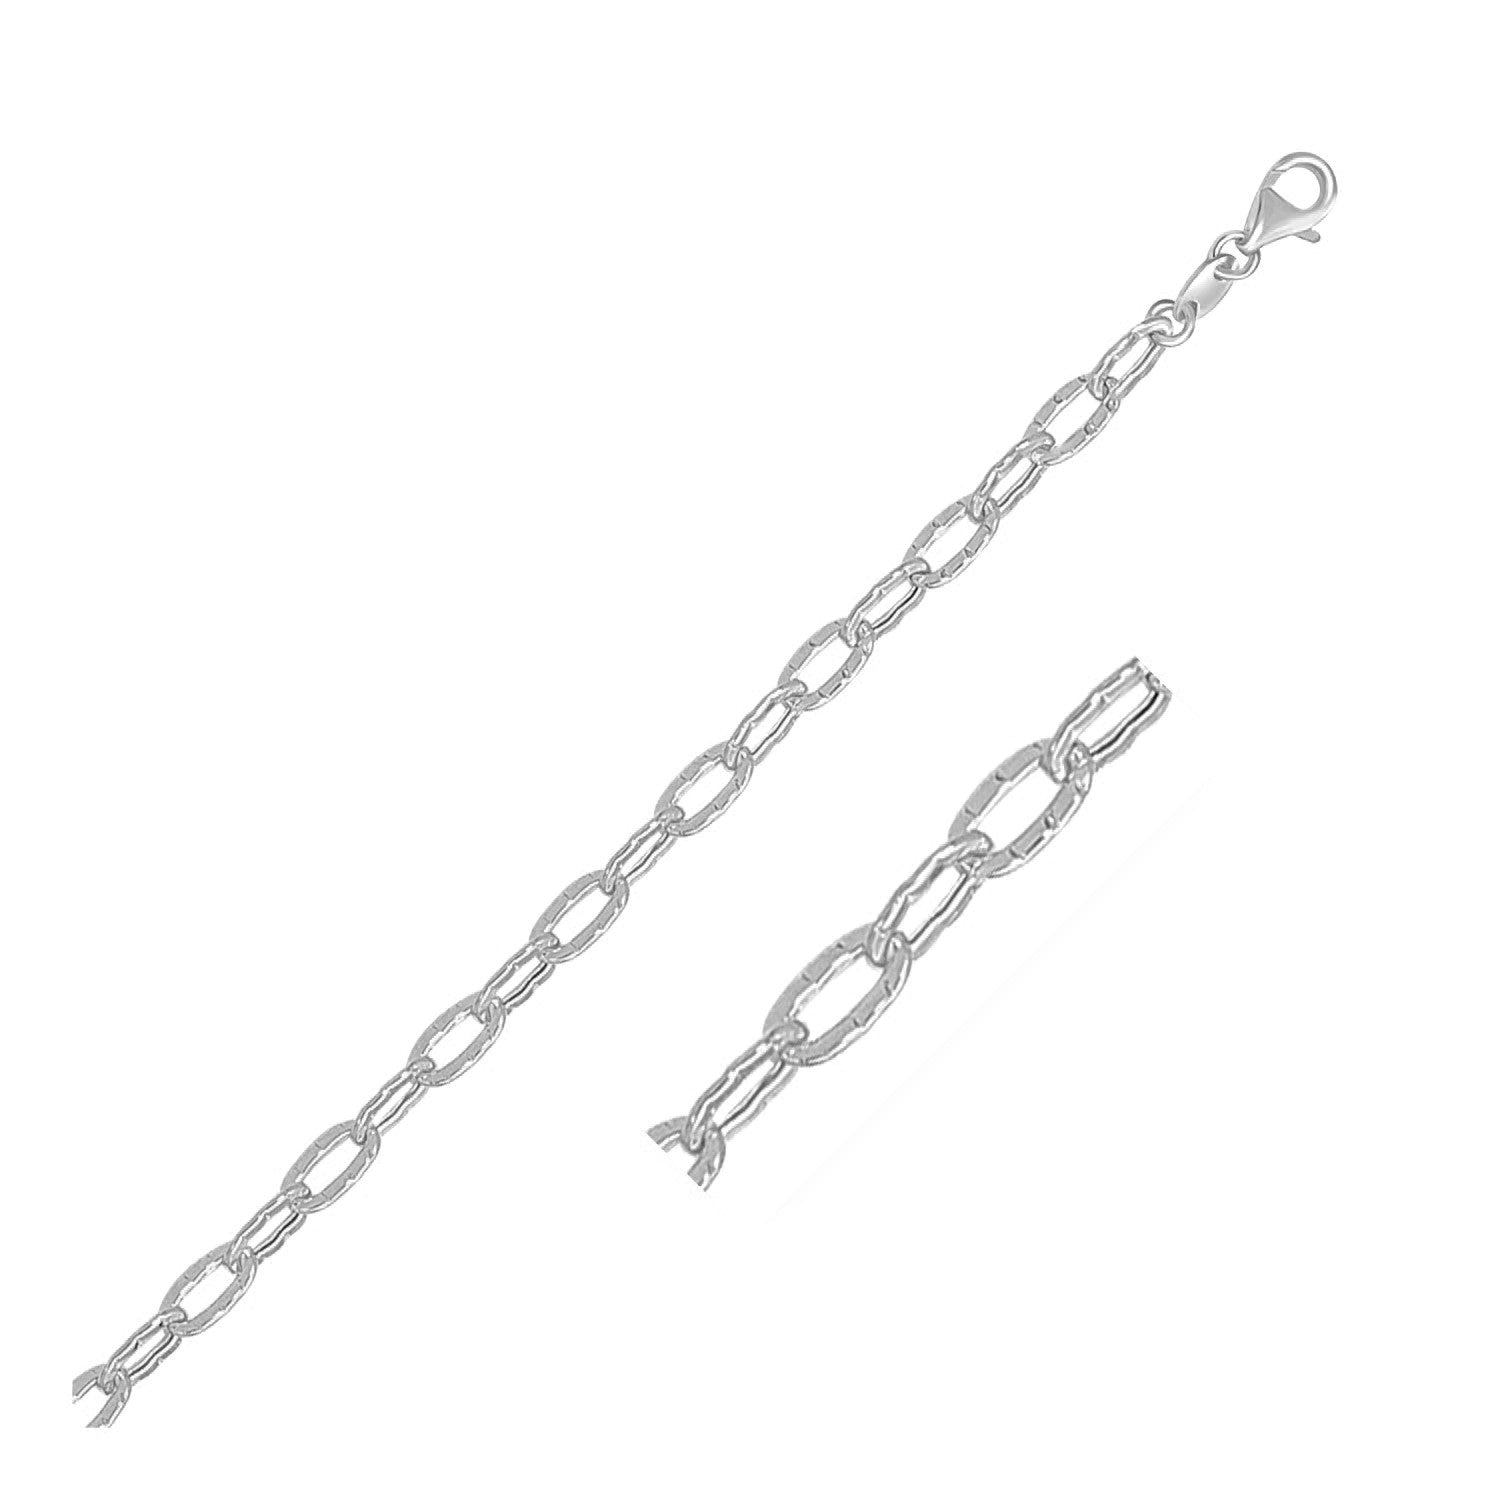 14k White Gold Anklet with Fancy Hammered Oval Links